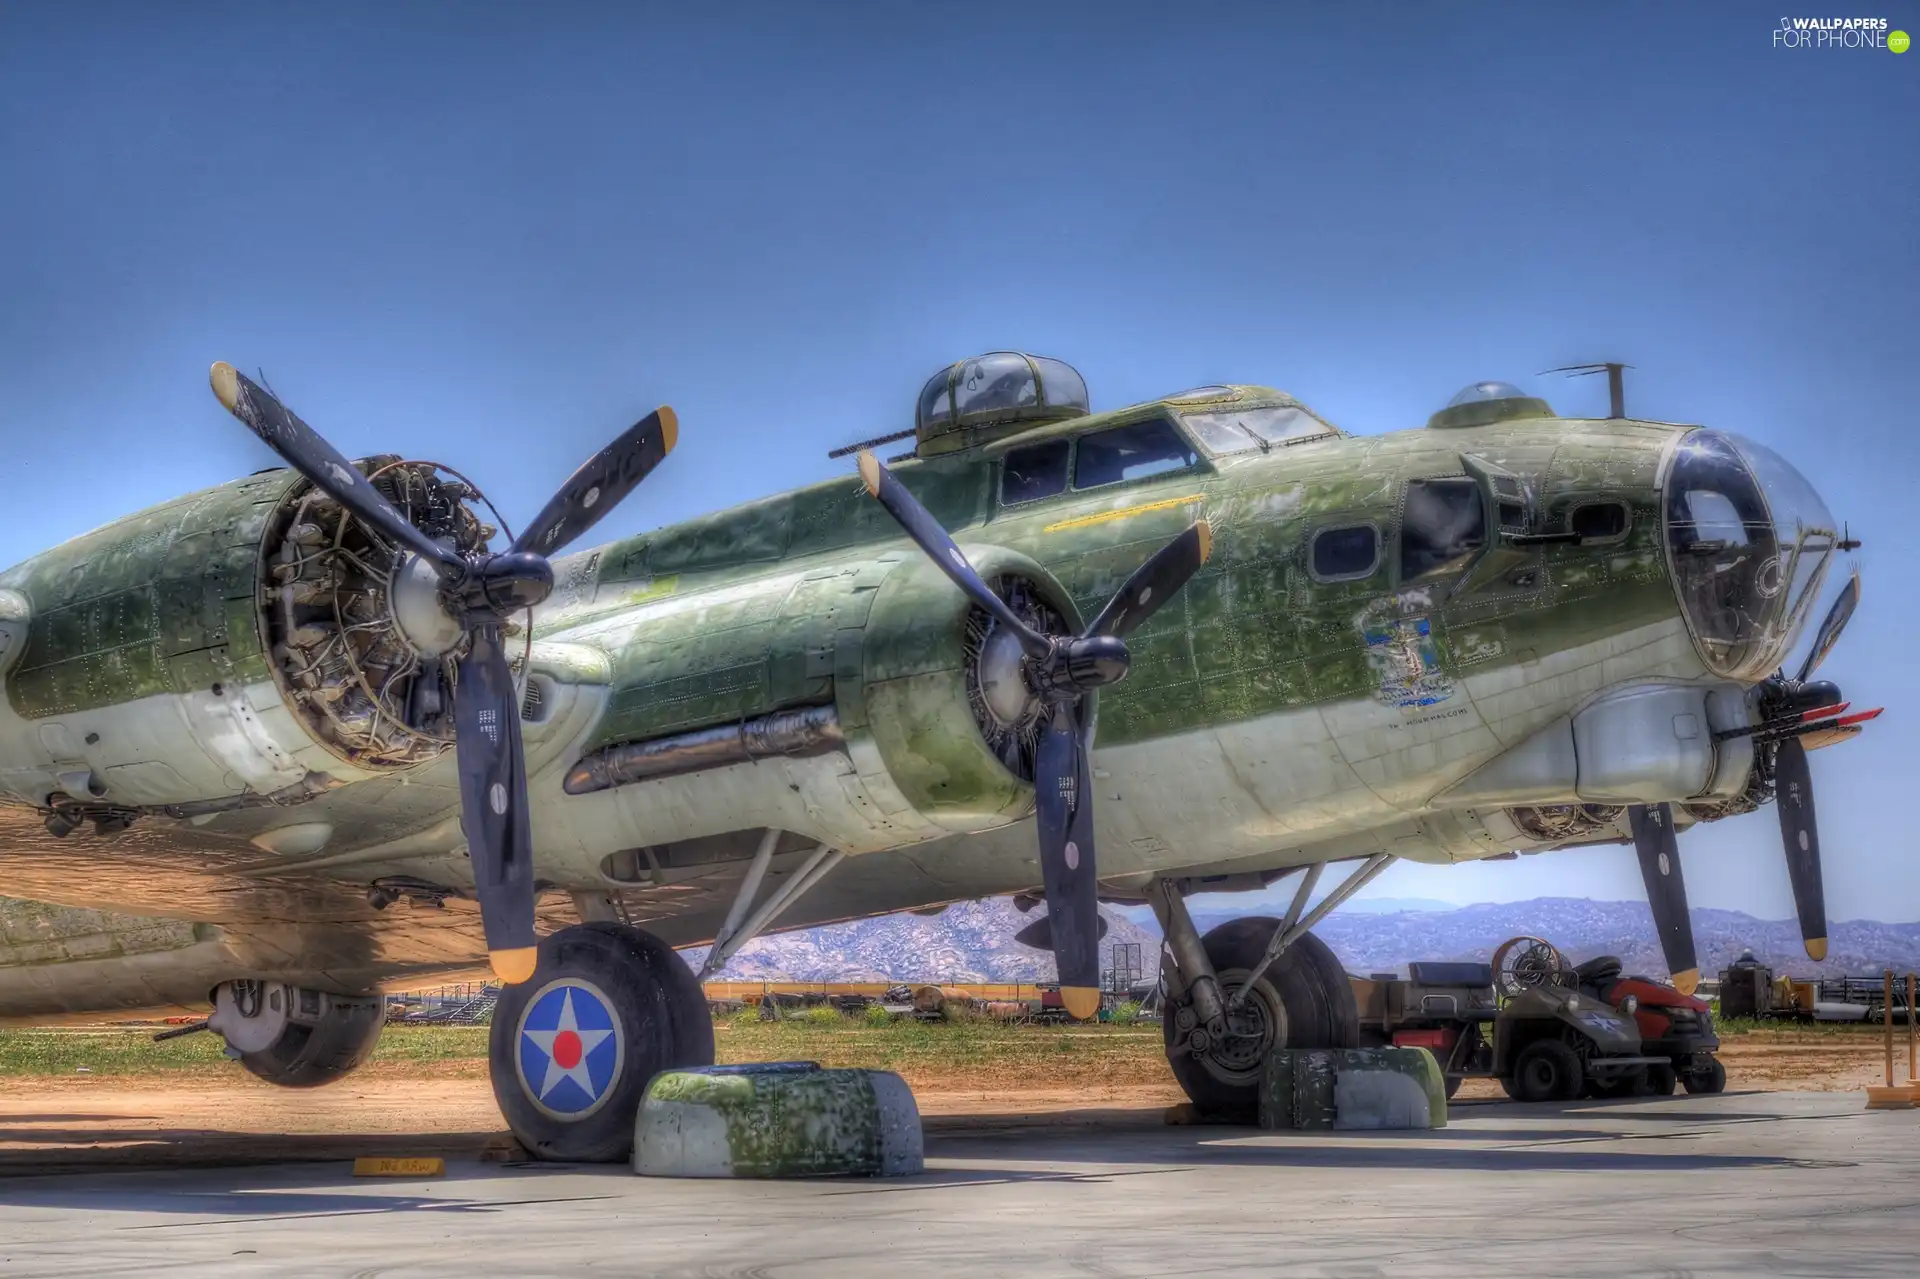 Propellers, Planes, HDR